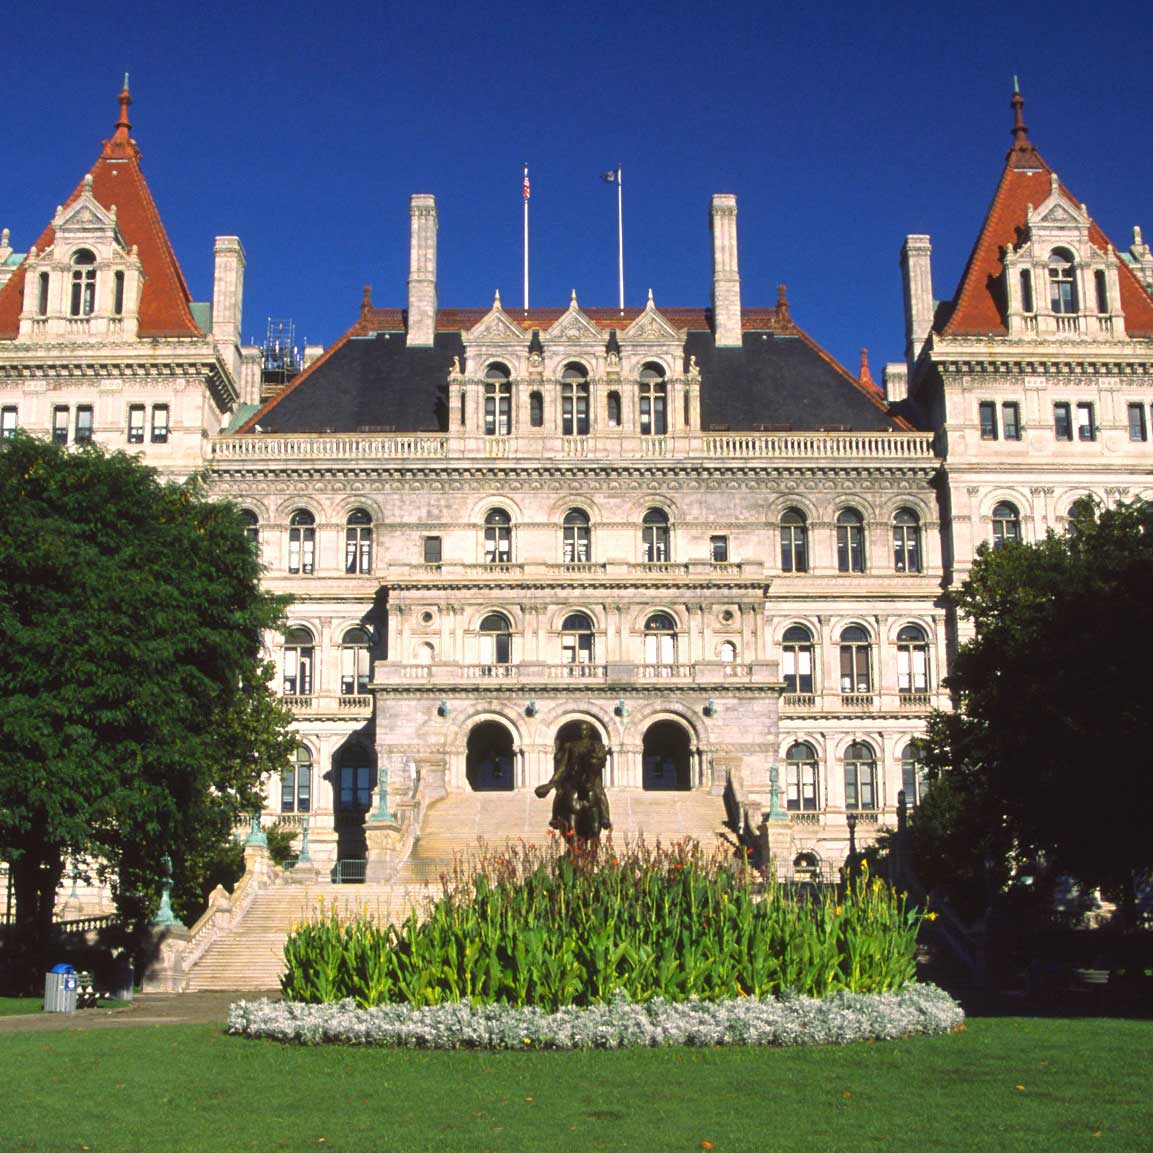 Image of exterior of New York State capitol building